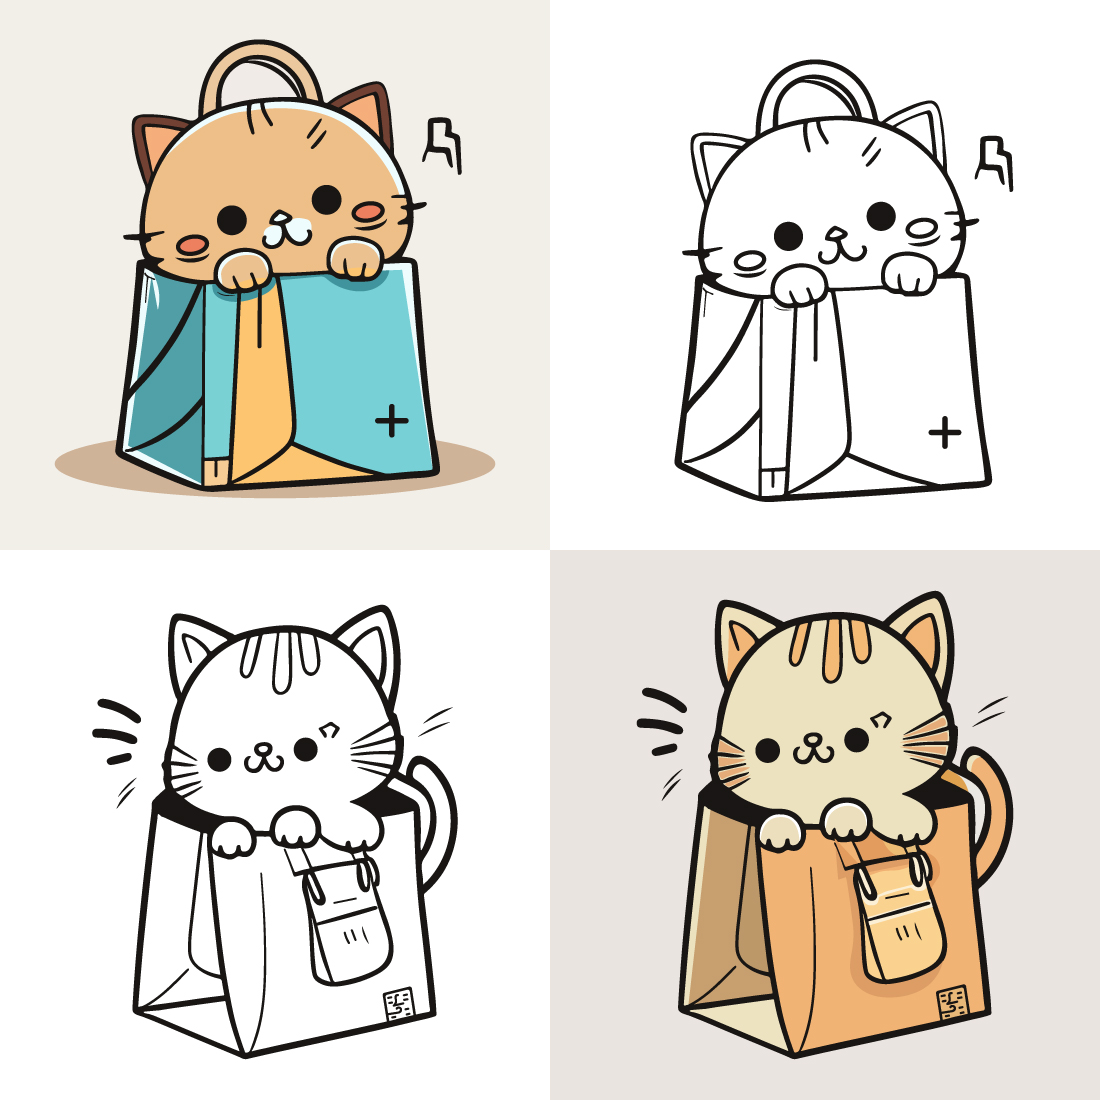 character of a Little cat in a paper shopping bag, a Cute cat, a Cat cartoon, a drawing, and a Cat mascot cover image.